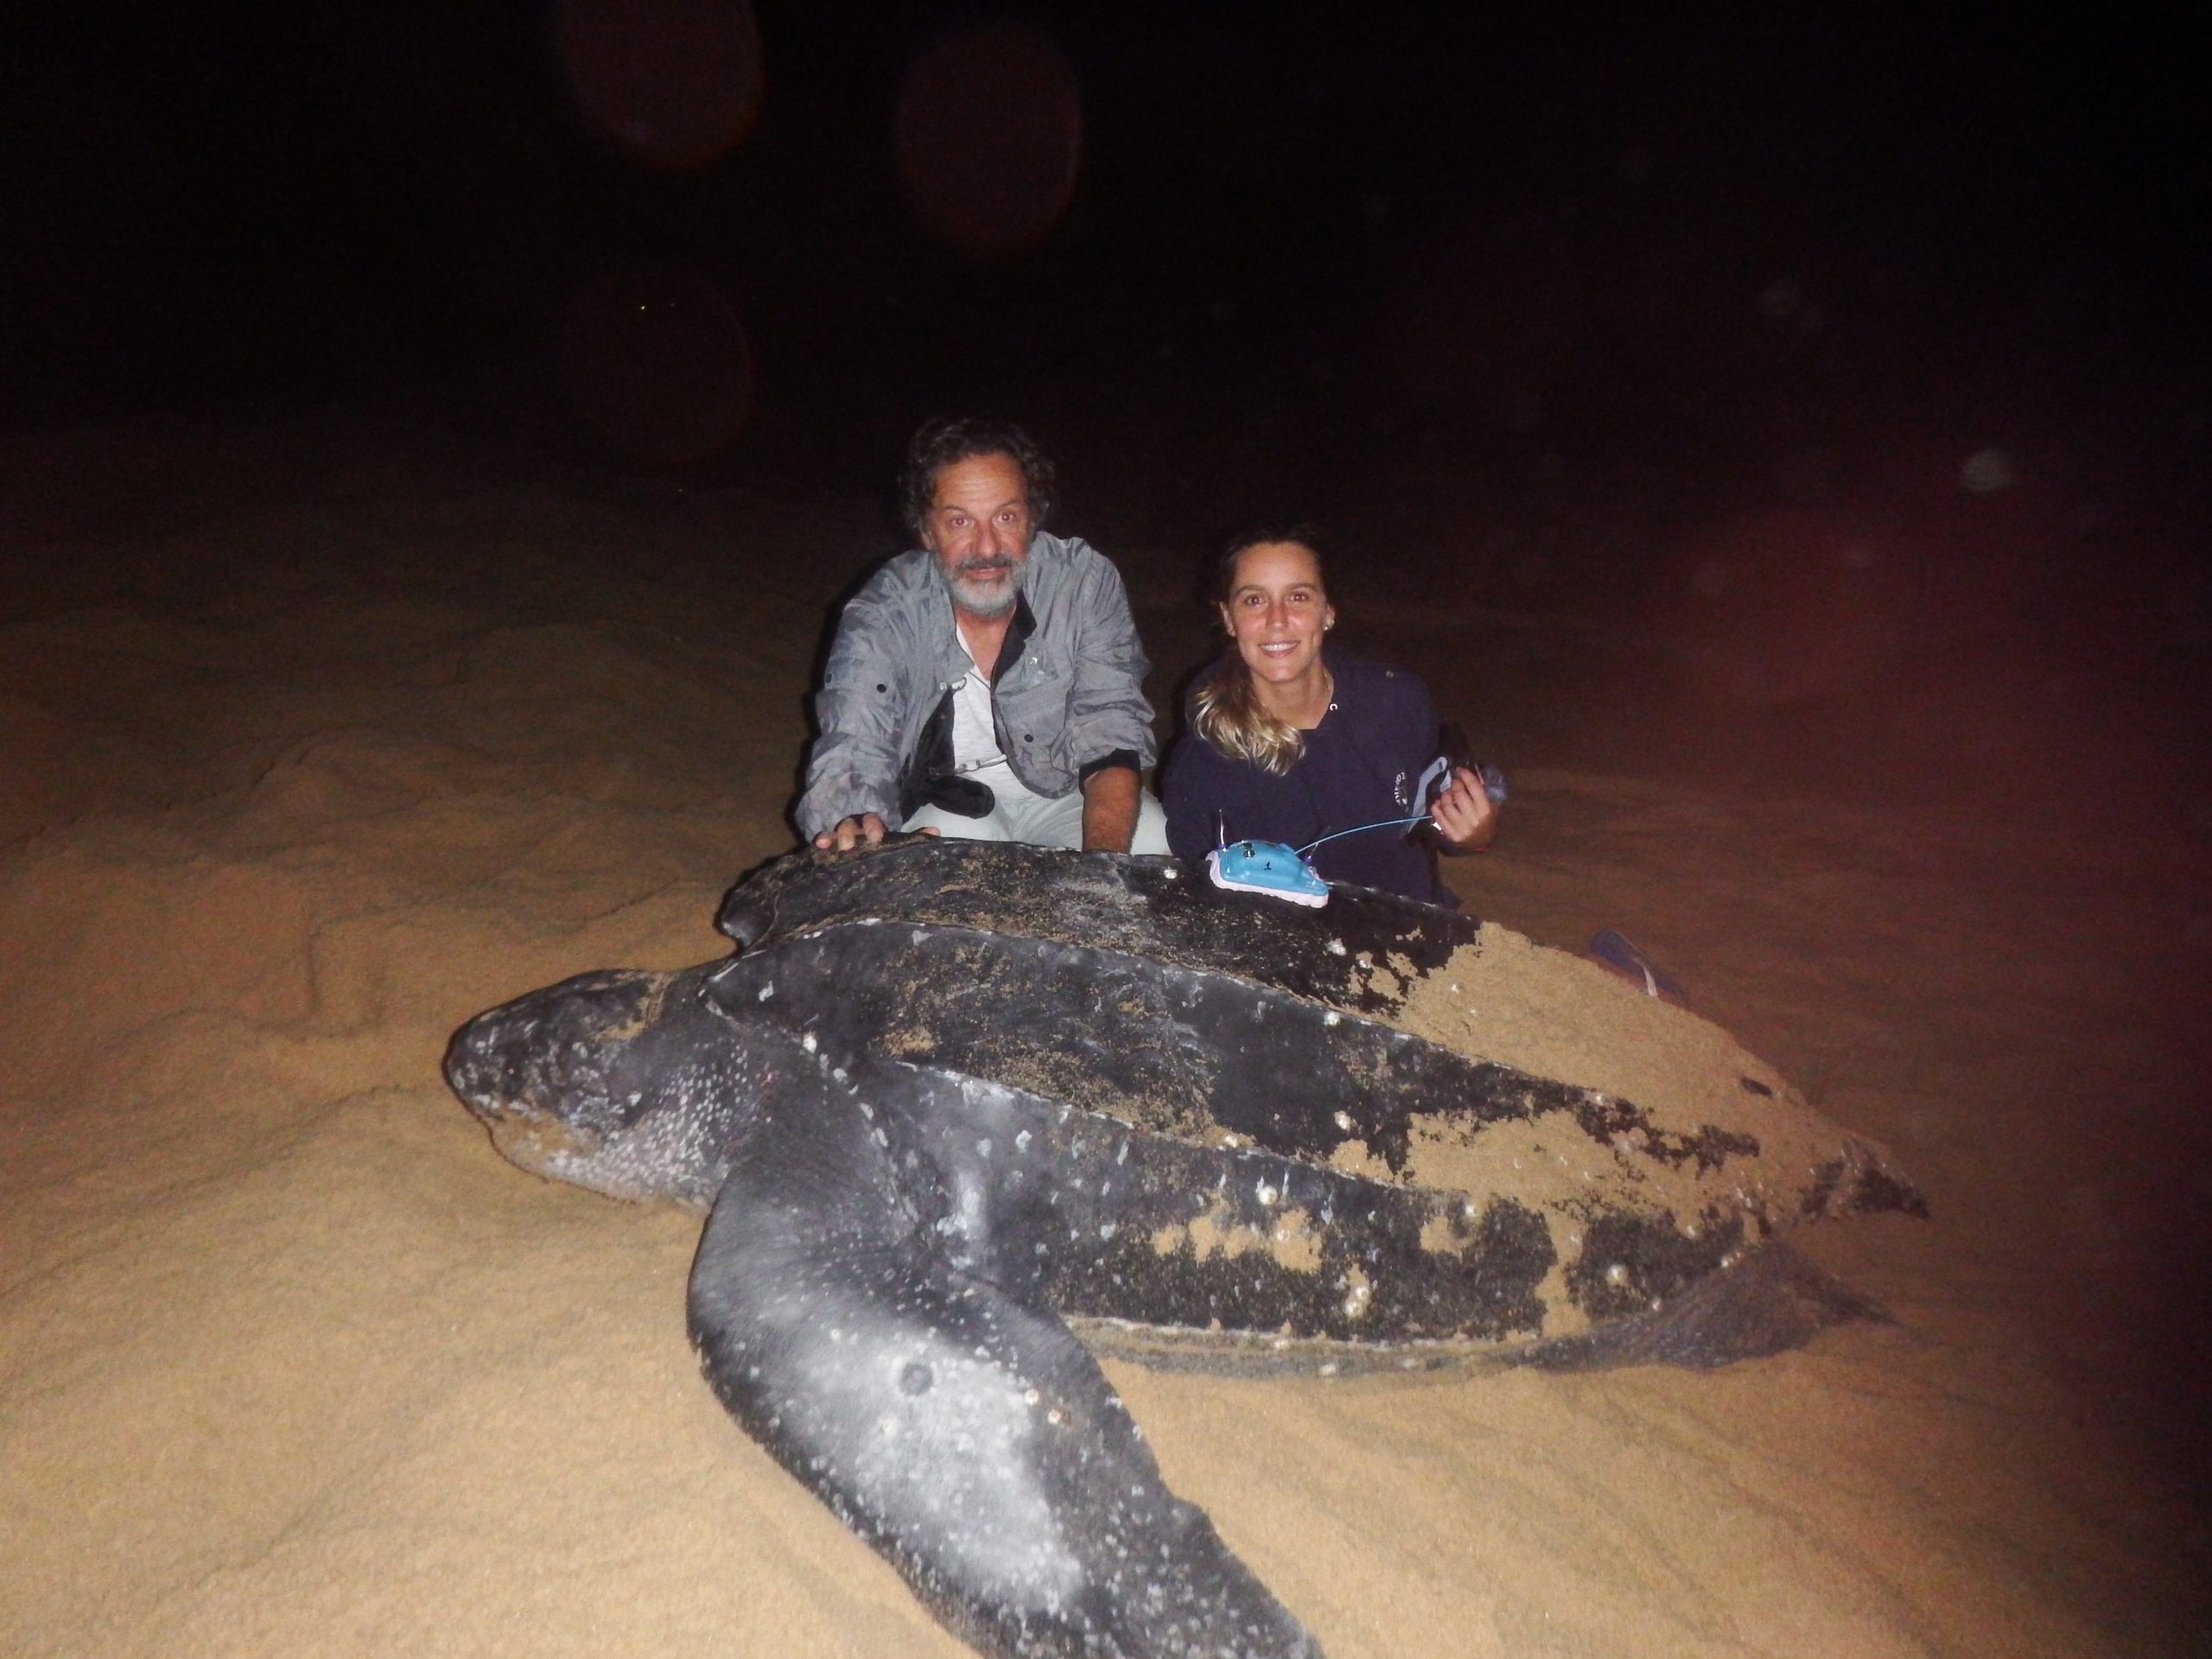 Tracking turtles to inform conservation